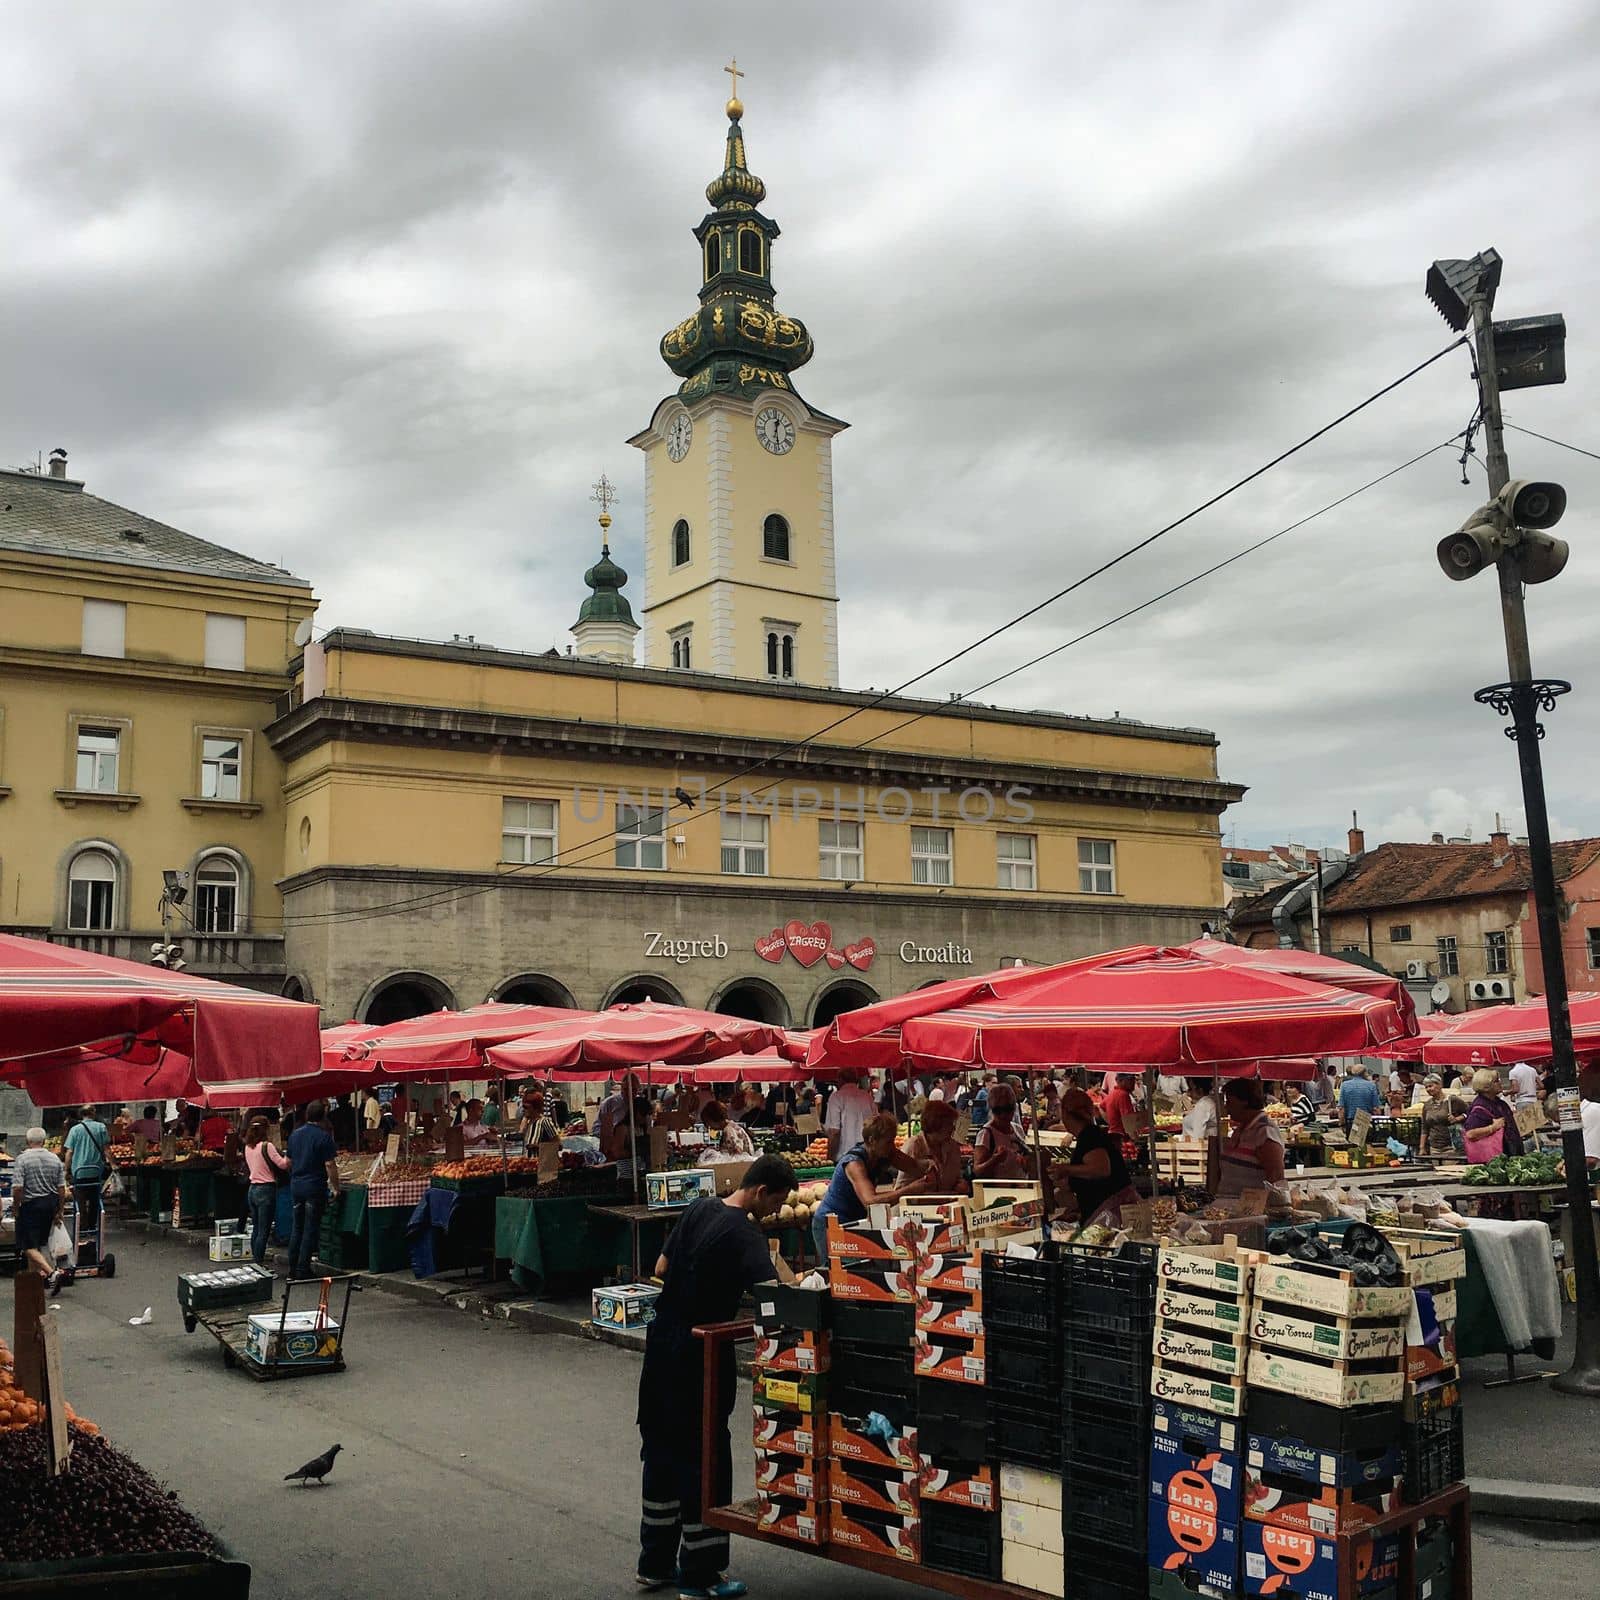 Market with street food and souvenirs in zagreb croatia by WeWander